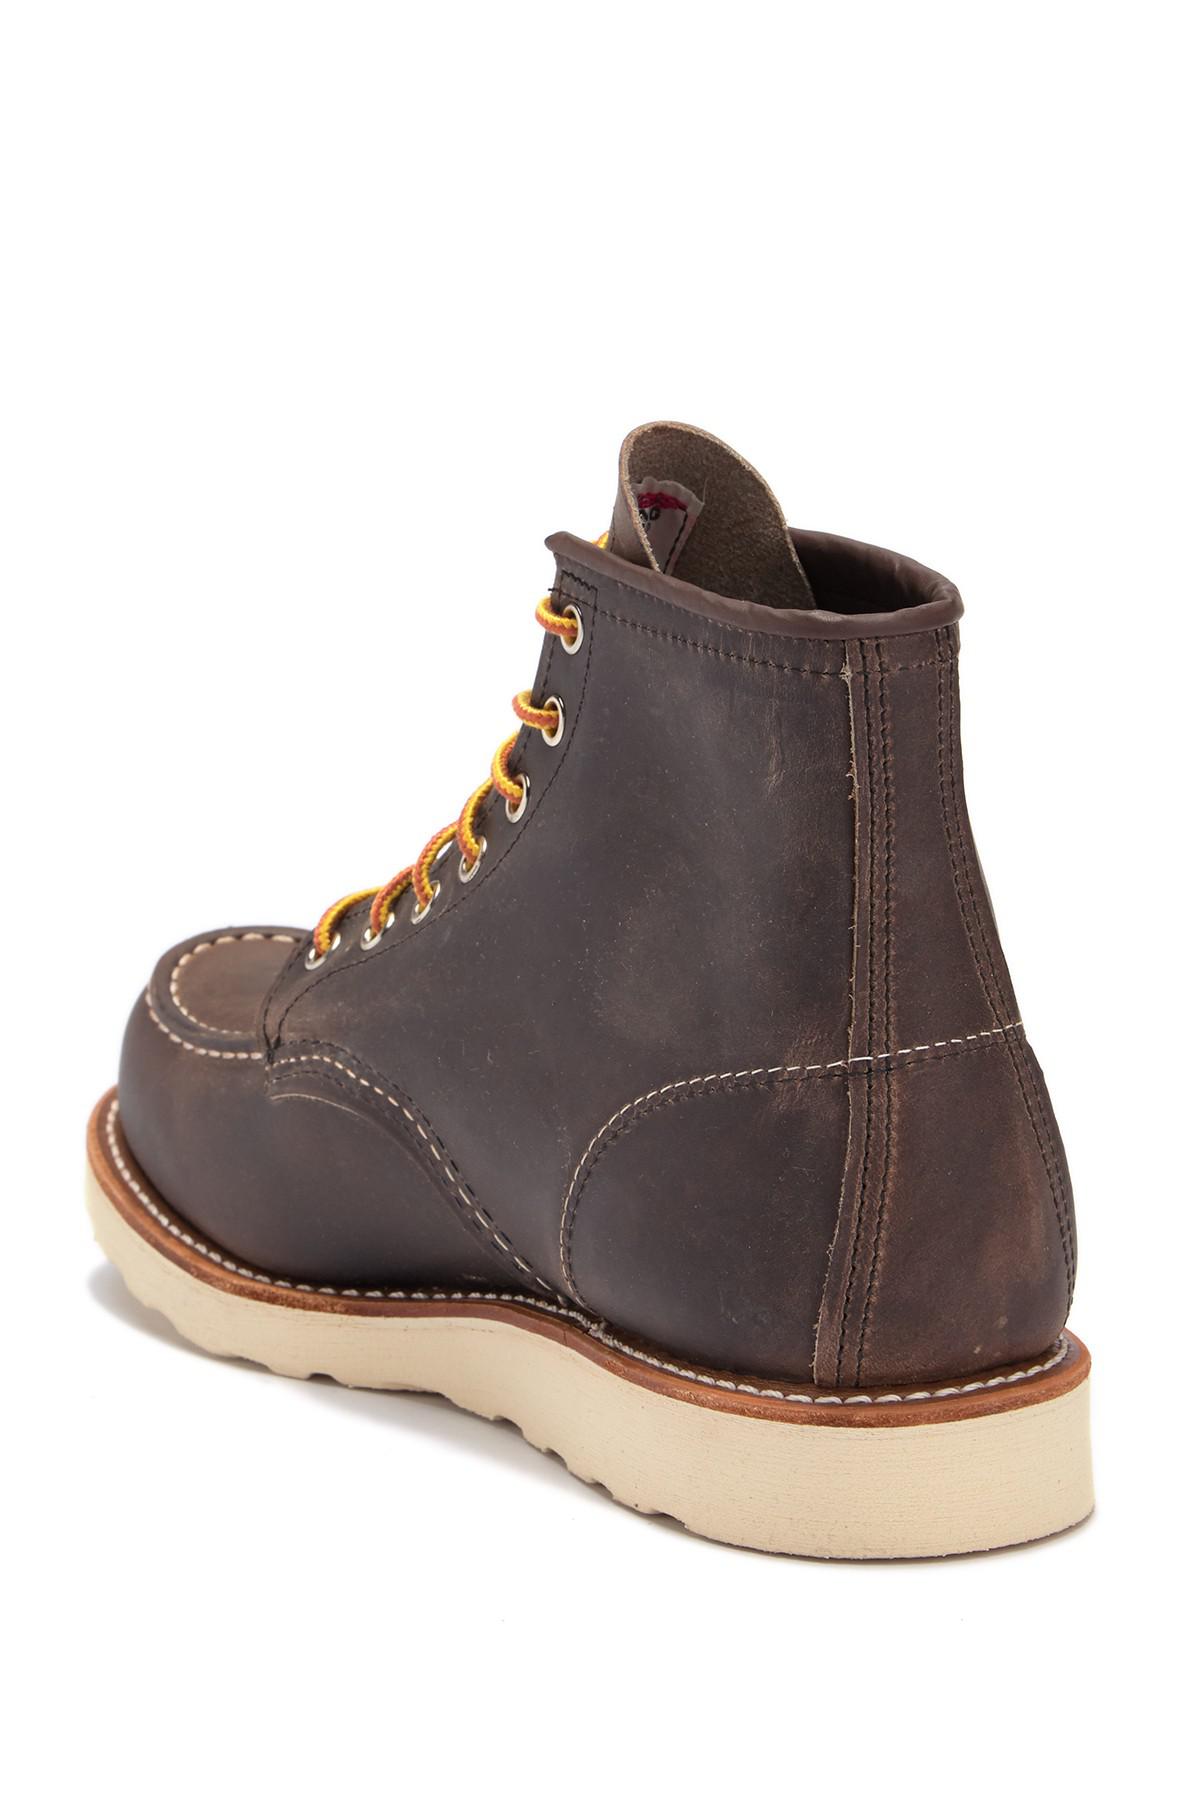 red wing moc toe factory second